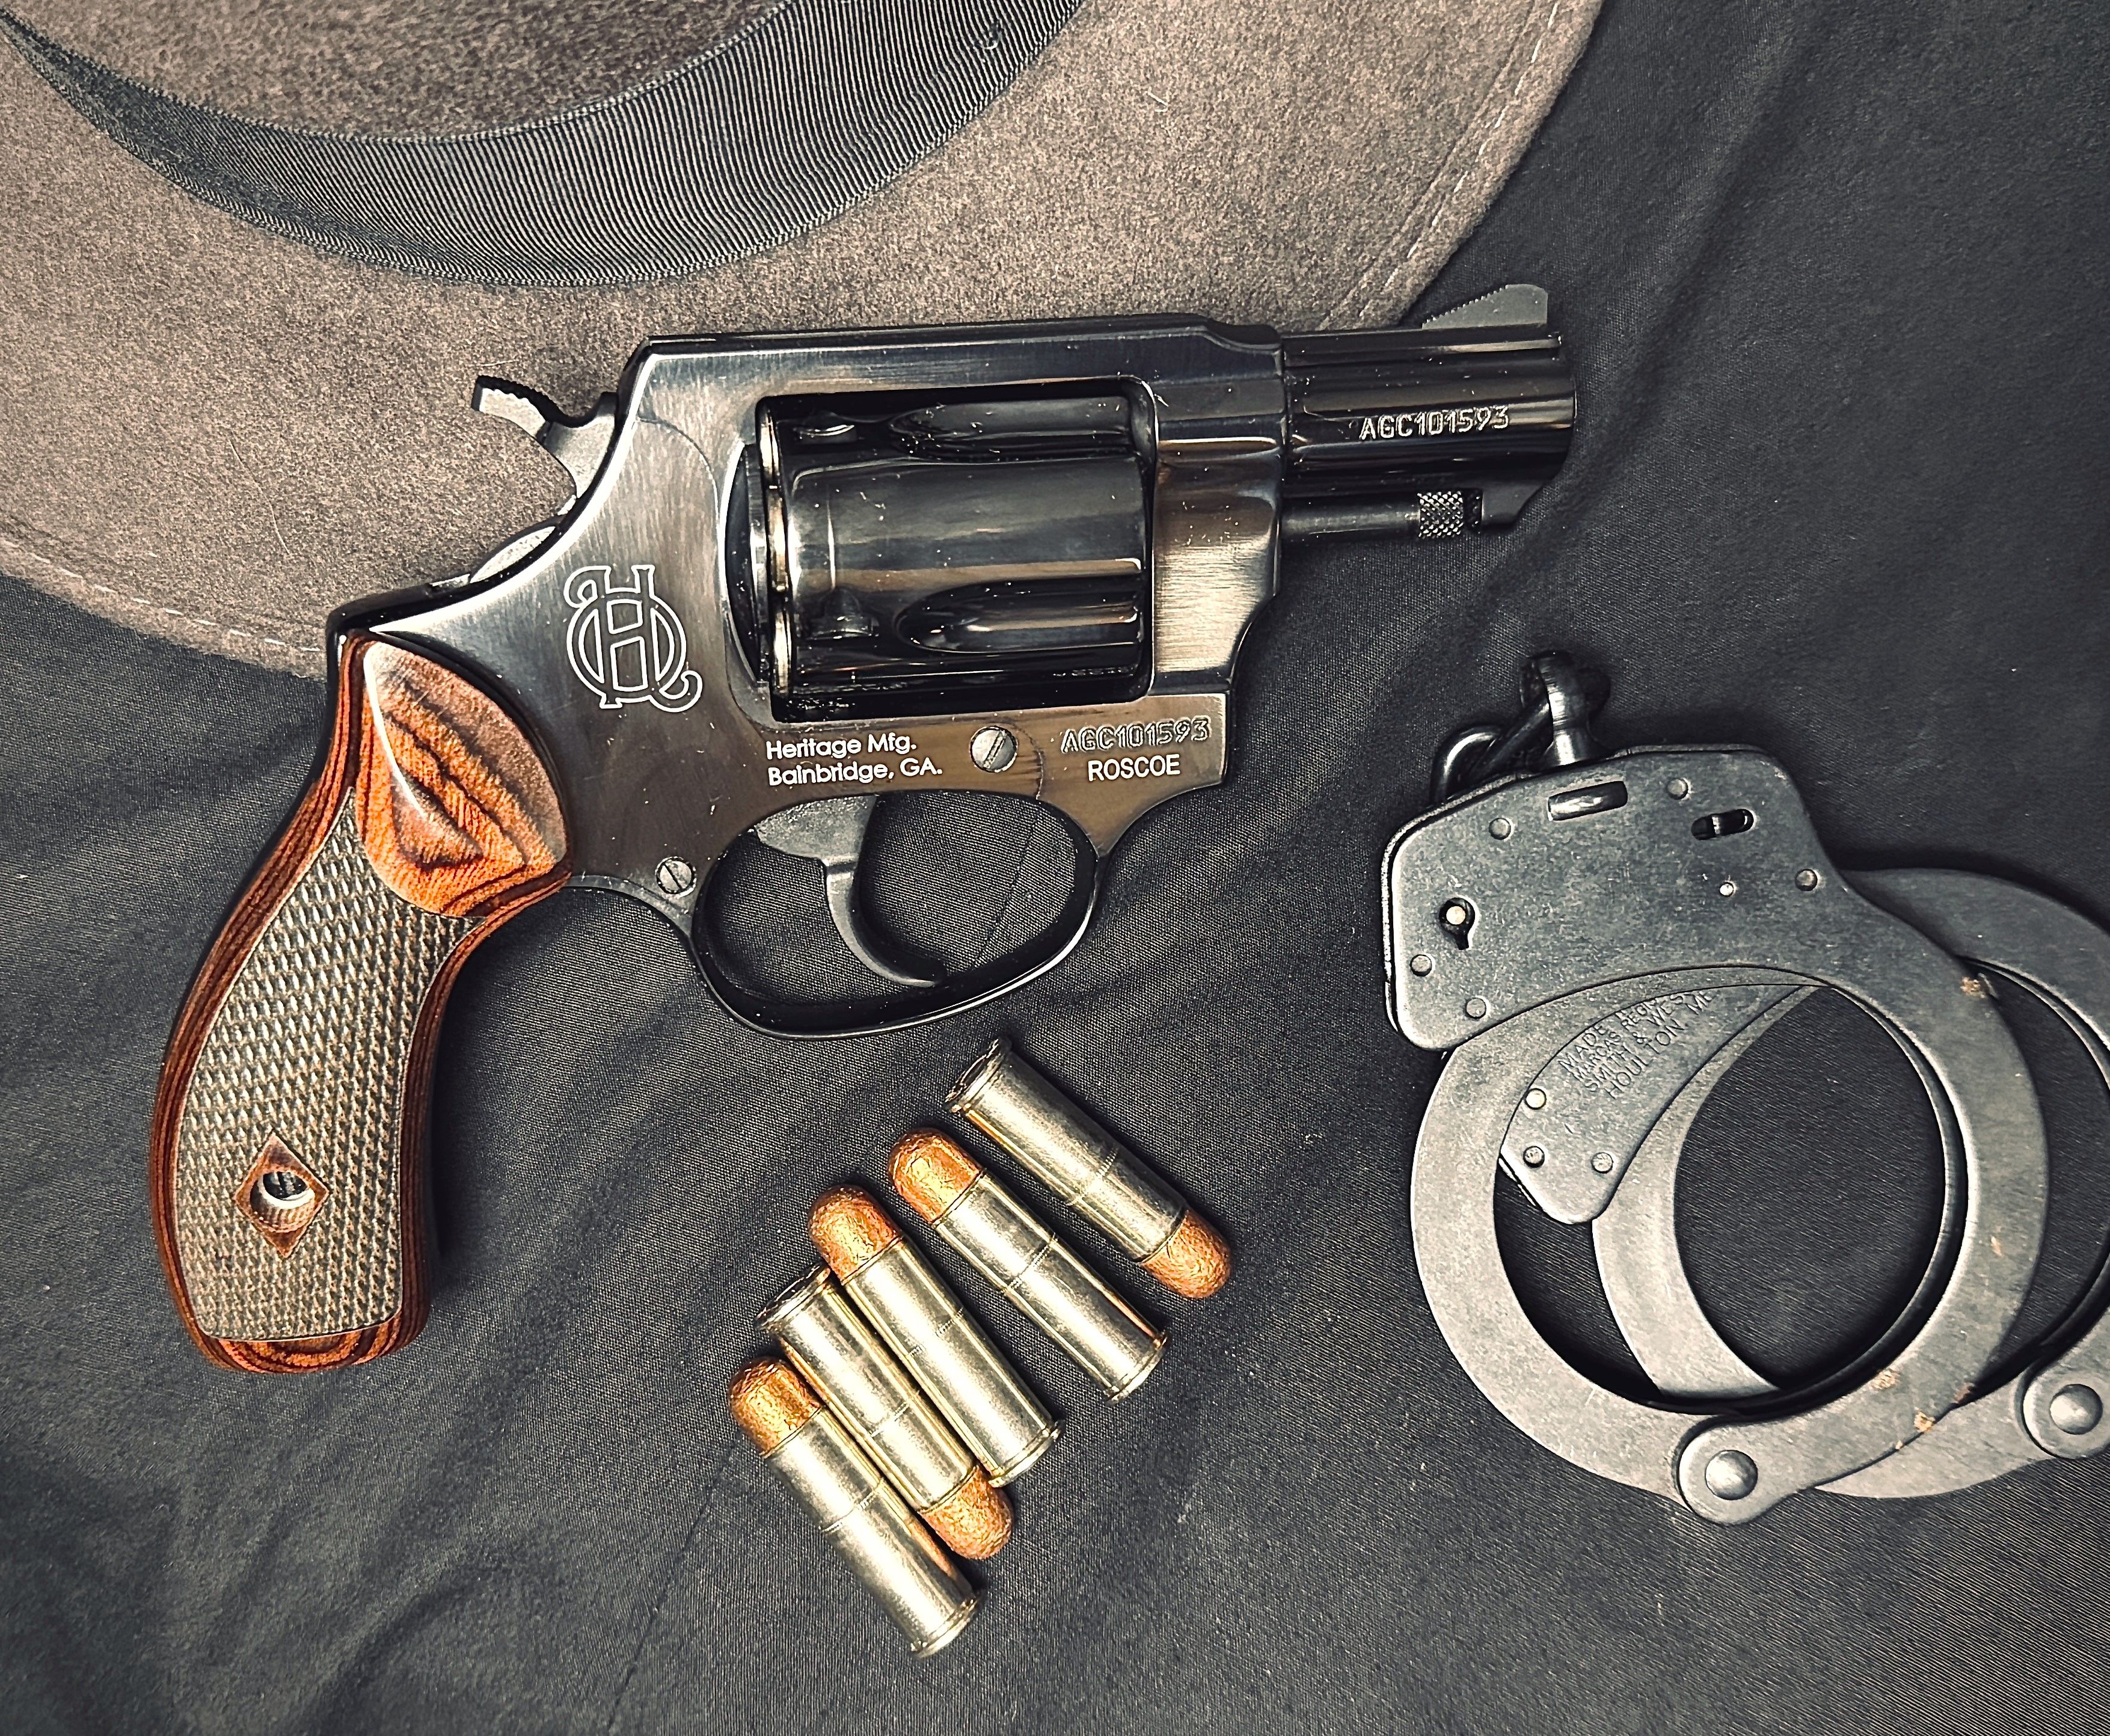 New from Heritage Mfg. is the Roscoe, a small-frame .38 Special snub-nose revolver with a design and looks that are a throwback to the 1950’s.